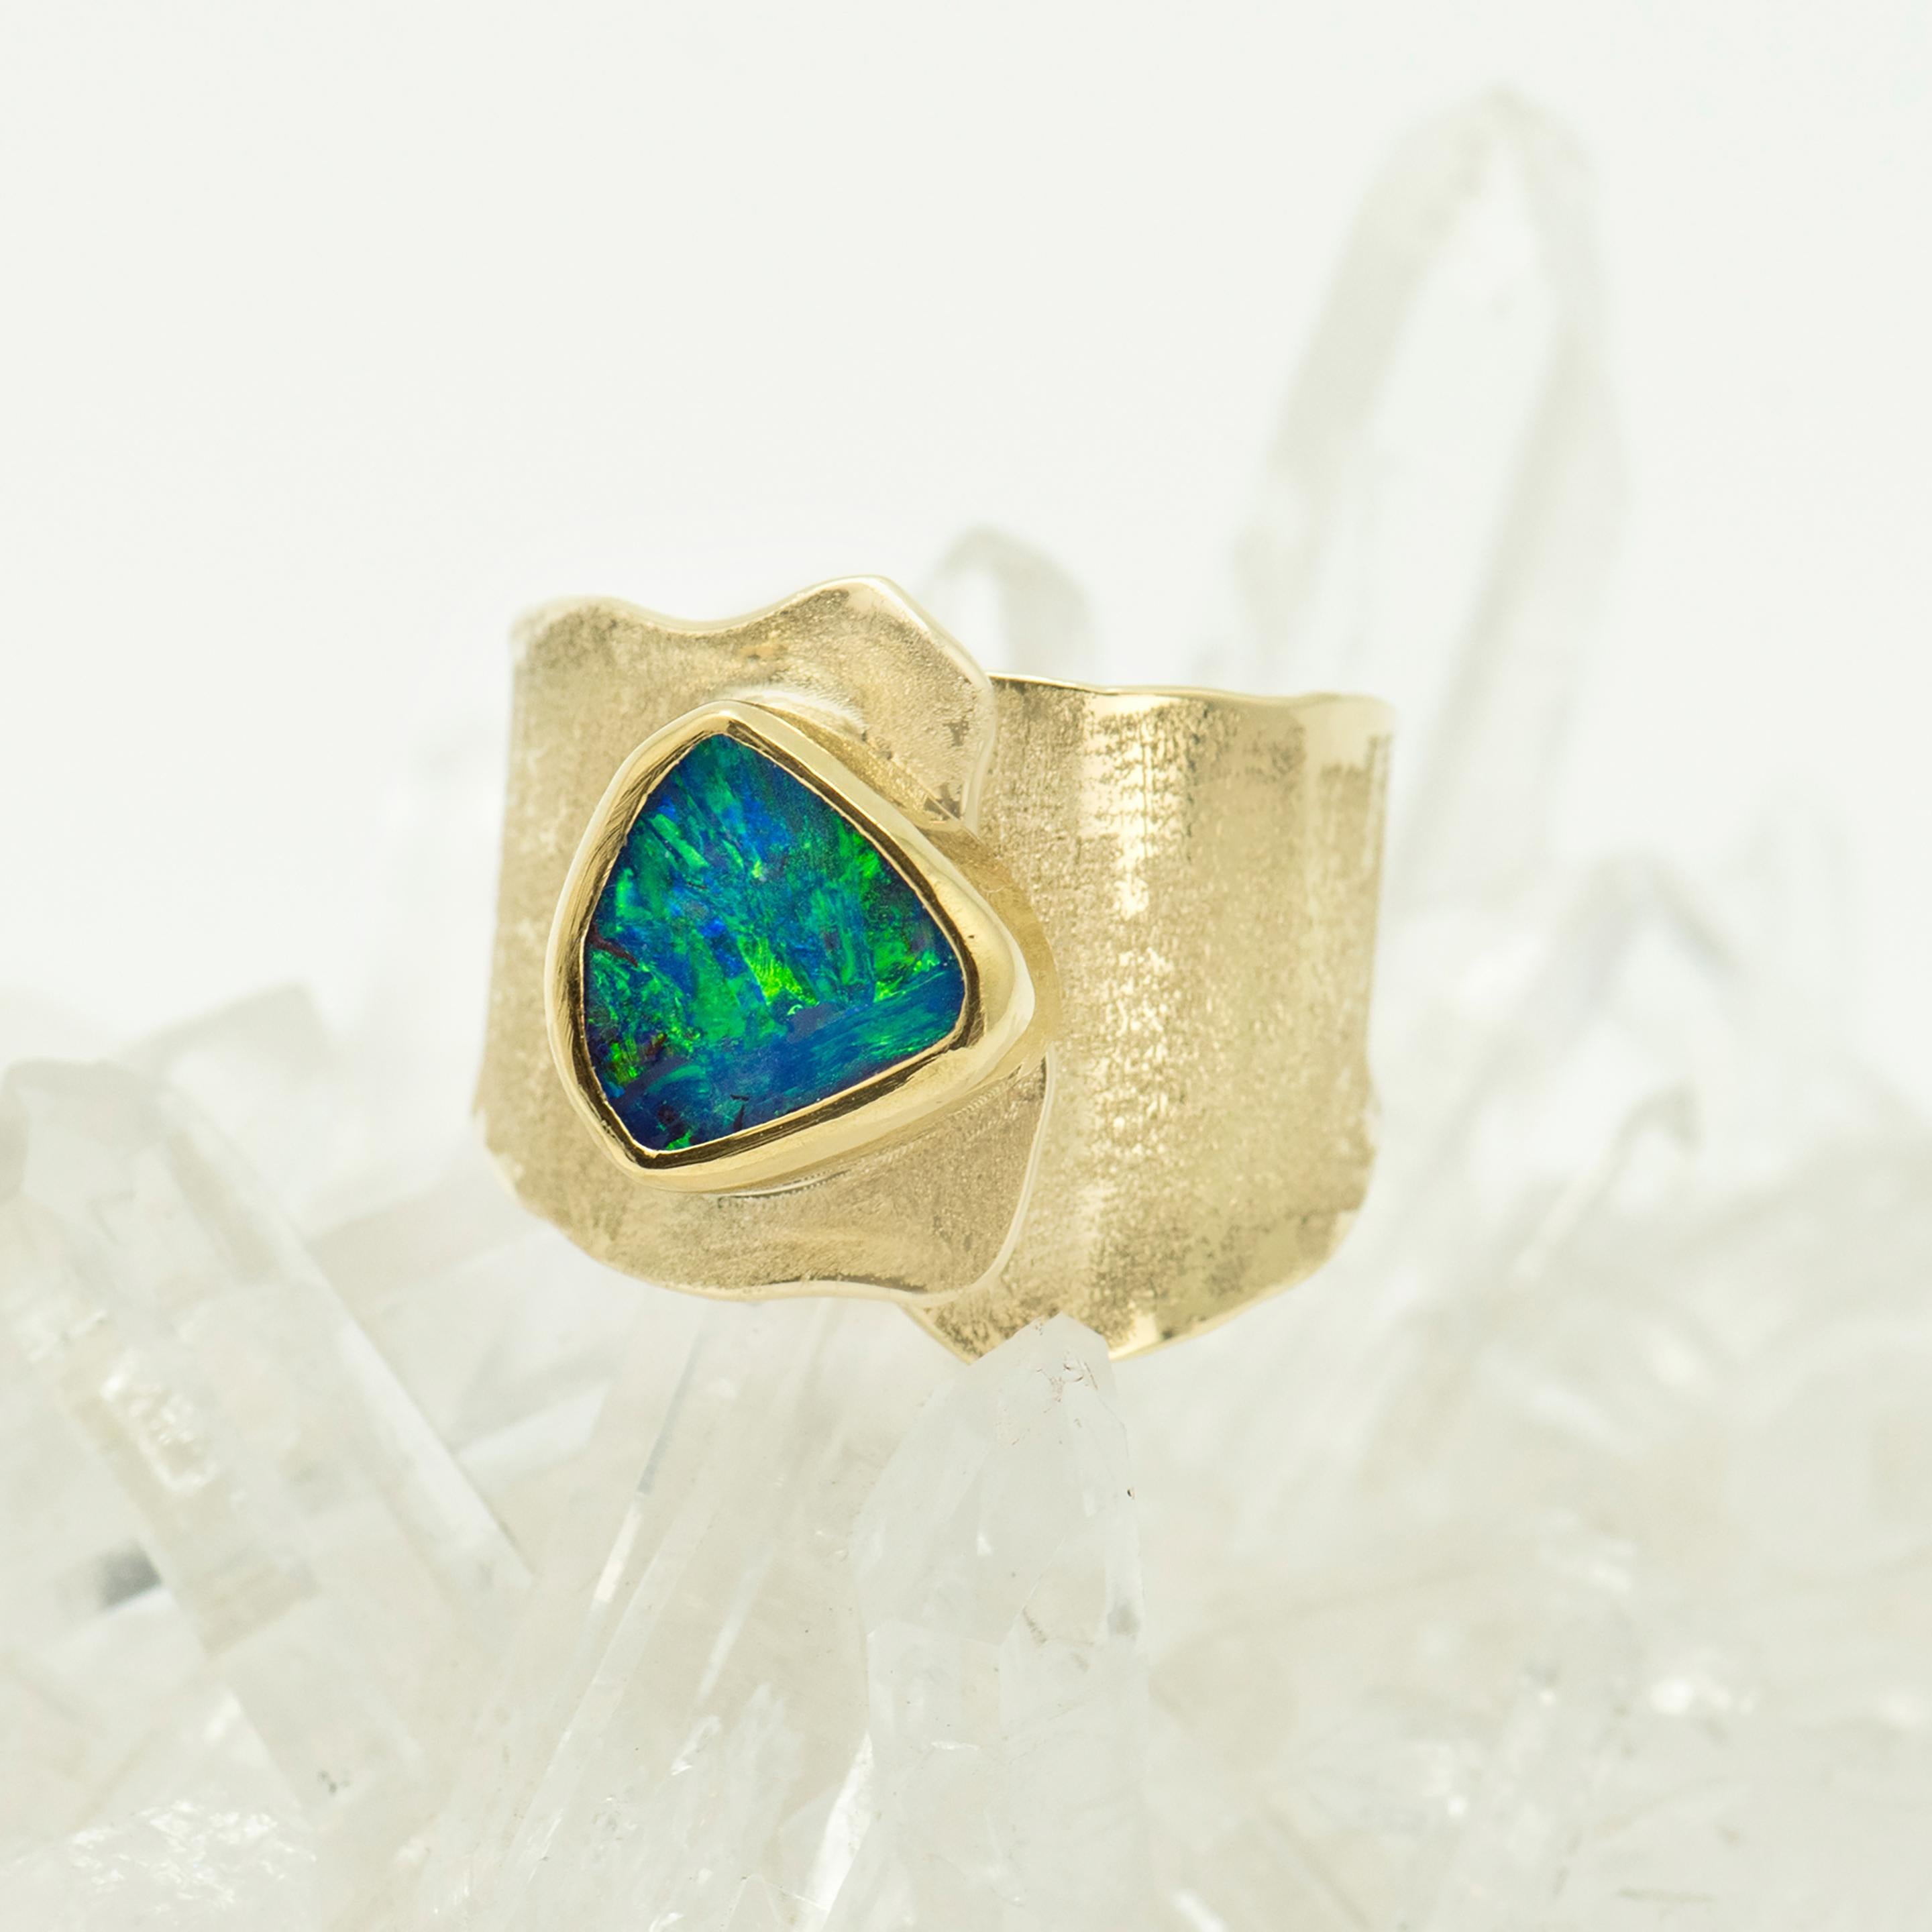 Boulder opal is one of the most beautiful gems on earth.  Its variety is unequal, thus each opal is unique unto itself.  That is special.  This boulder opal has  beautiful green flash with some blue.  The wide 18k gold band is textured and very